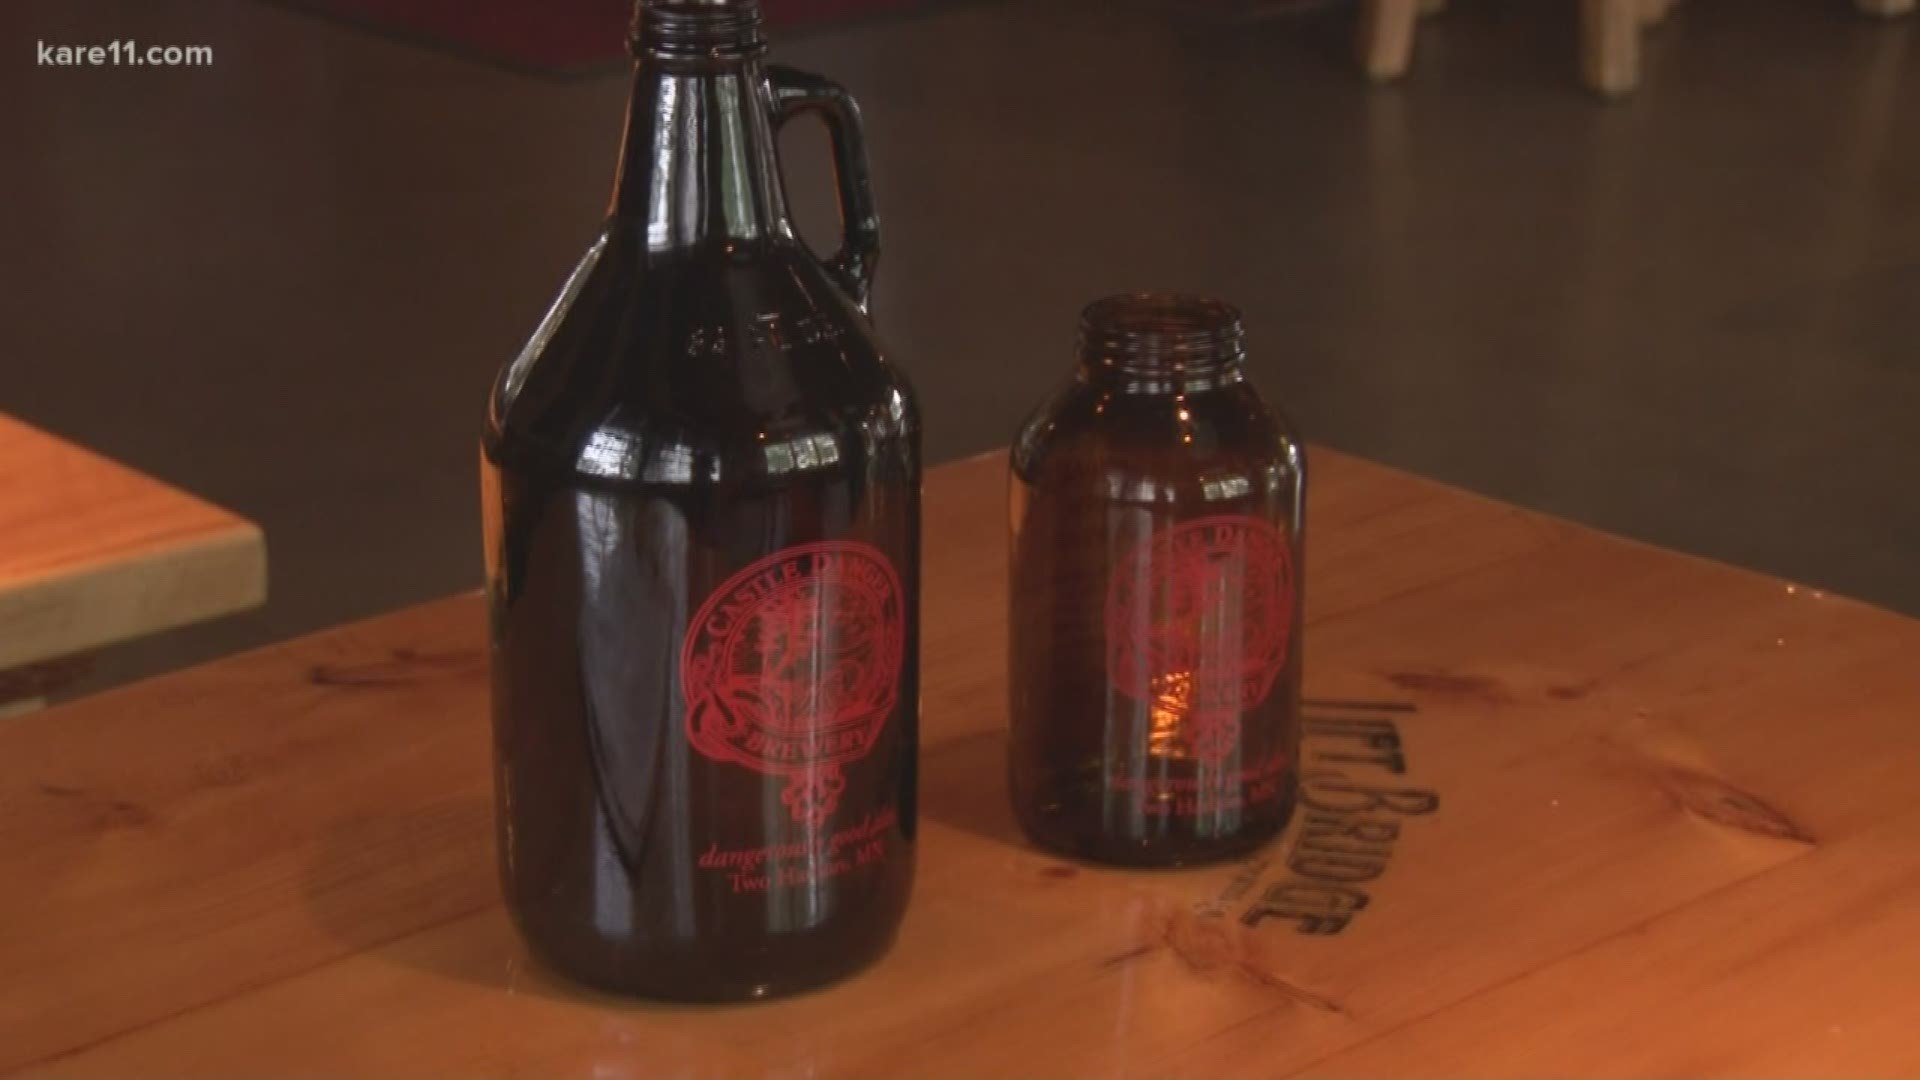 Castle Danger Brewery is required to stop selling growlers on Oct. 1 because the Two Harbors brewery surpassed producing 20,000 barrels of beer a year.